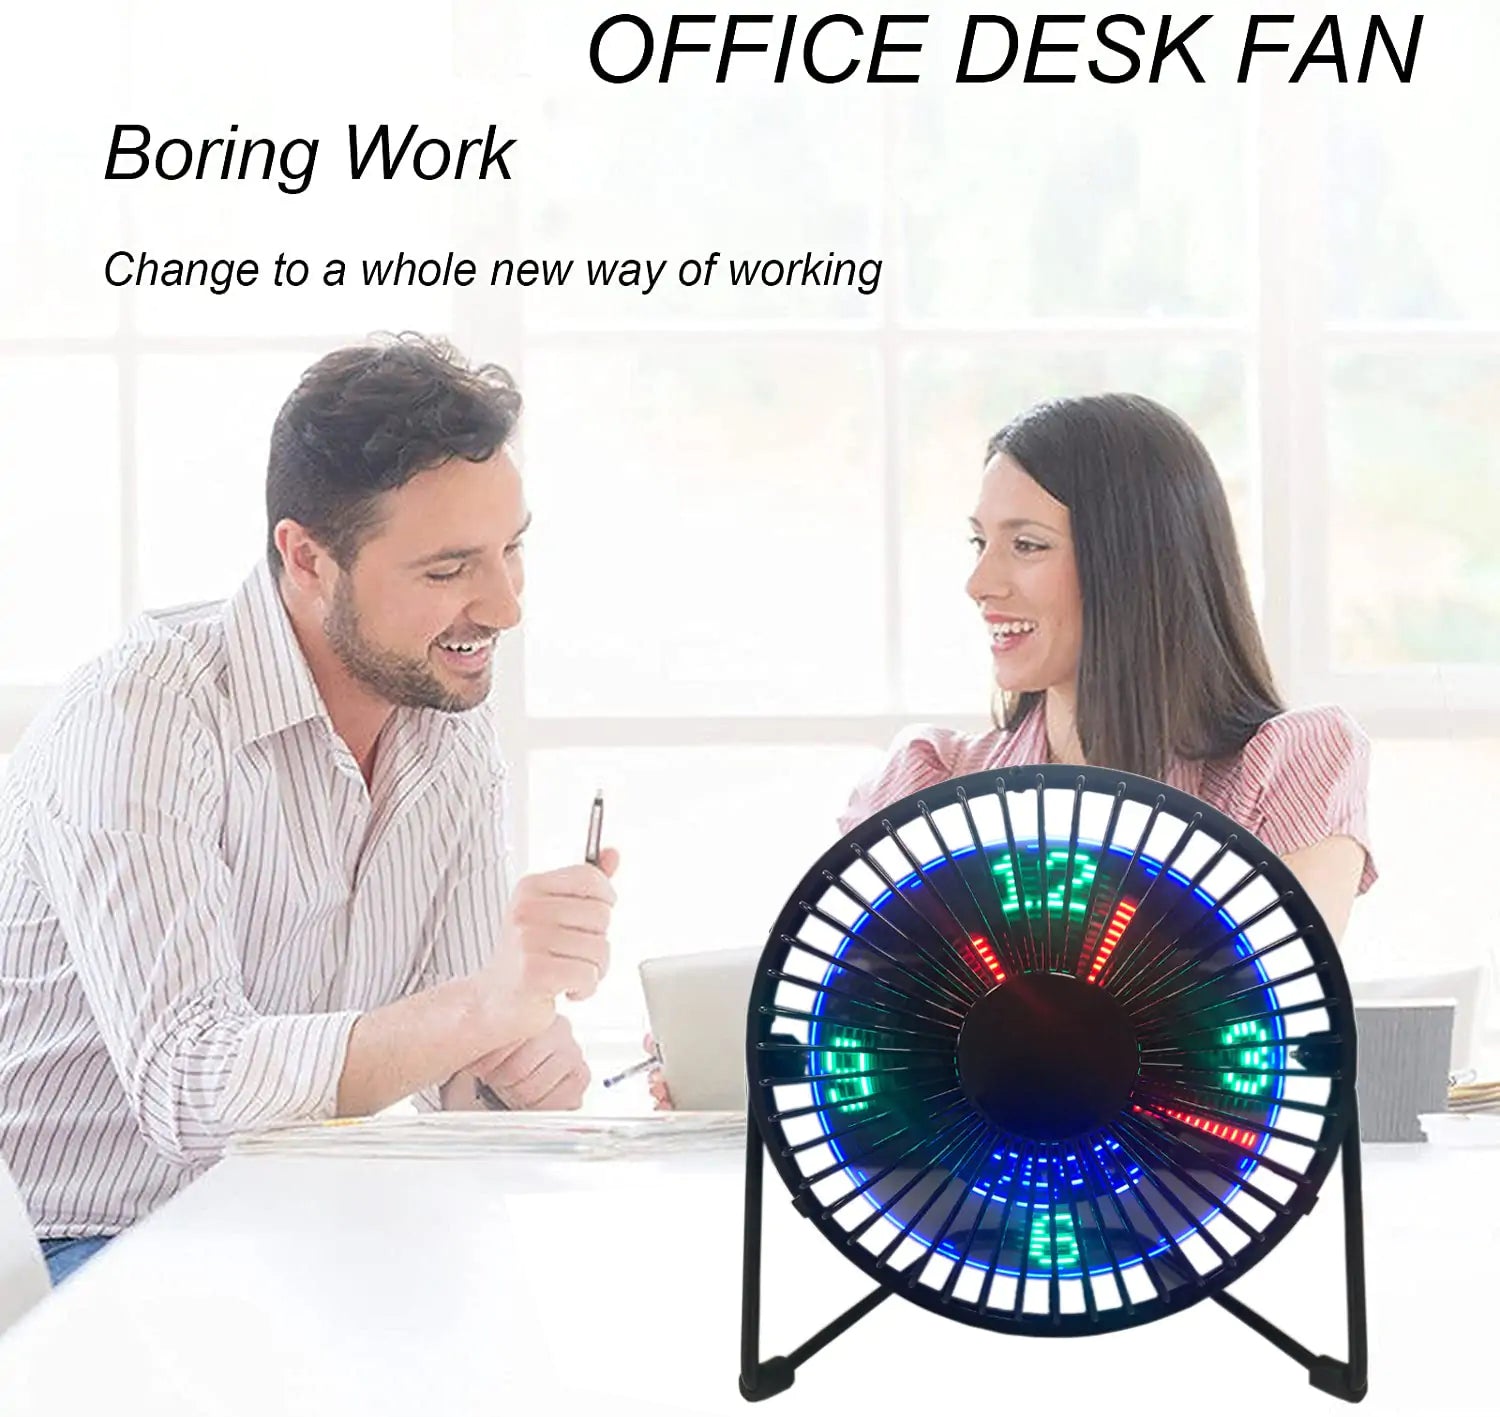 LED Desk Fan Programmable USB LED Fan Mini Quiet Fan with Clock Temperature Display 360° Rotation Portable Fan for Home Office Durable Metal Design